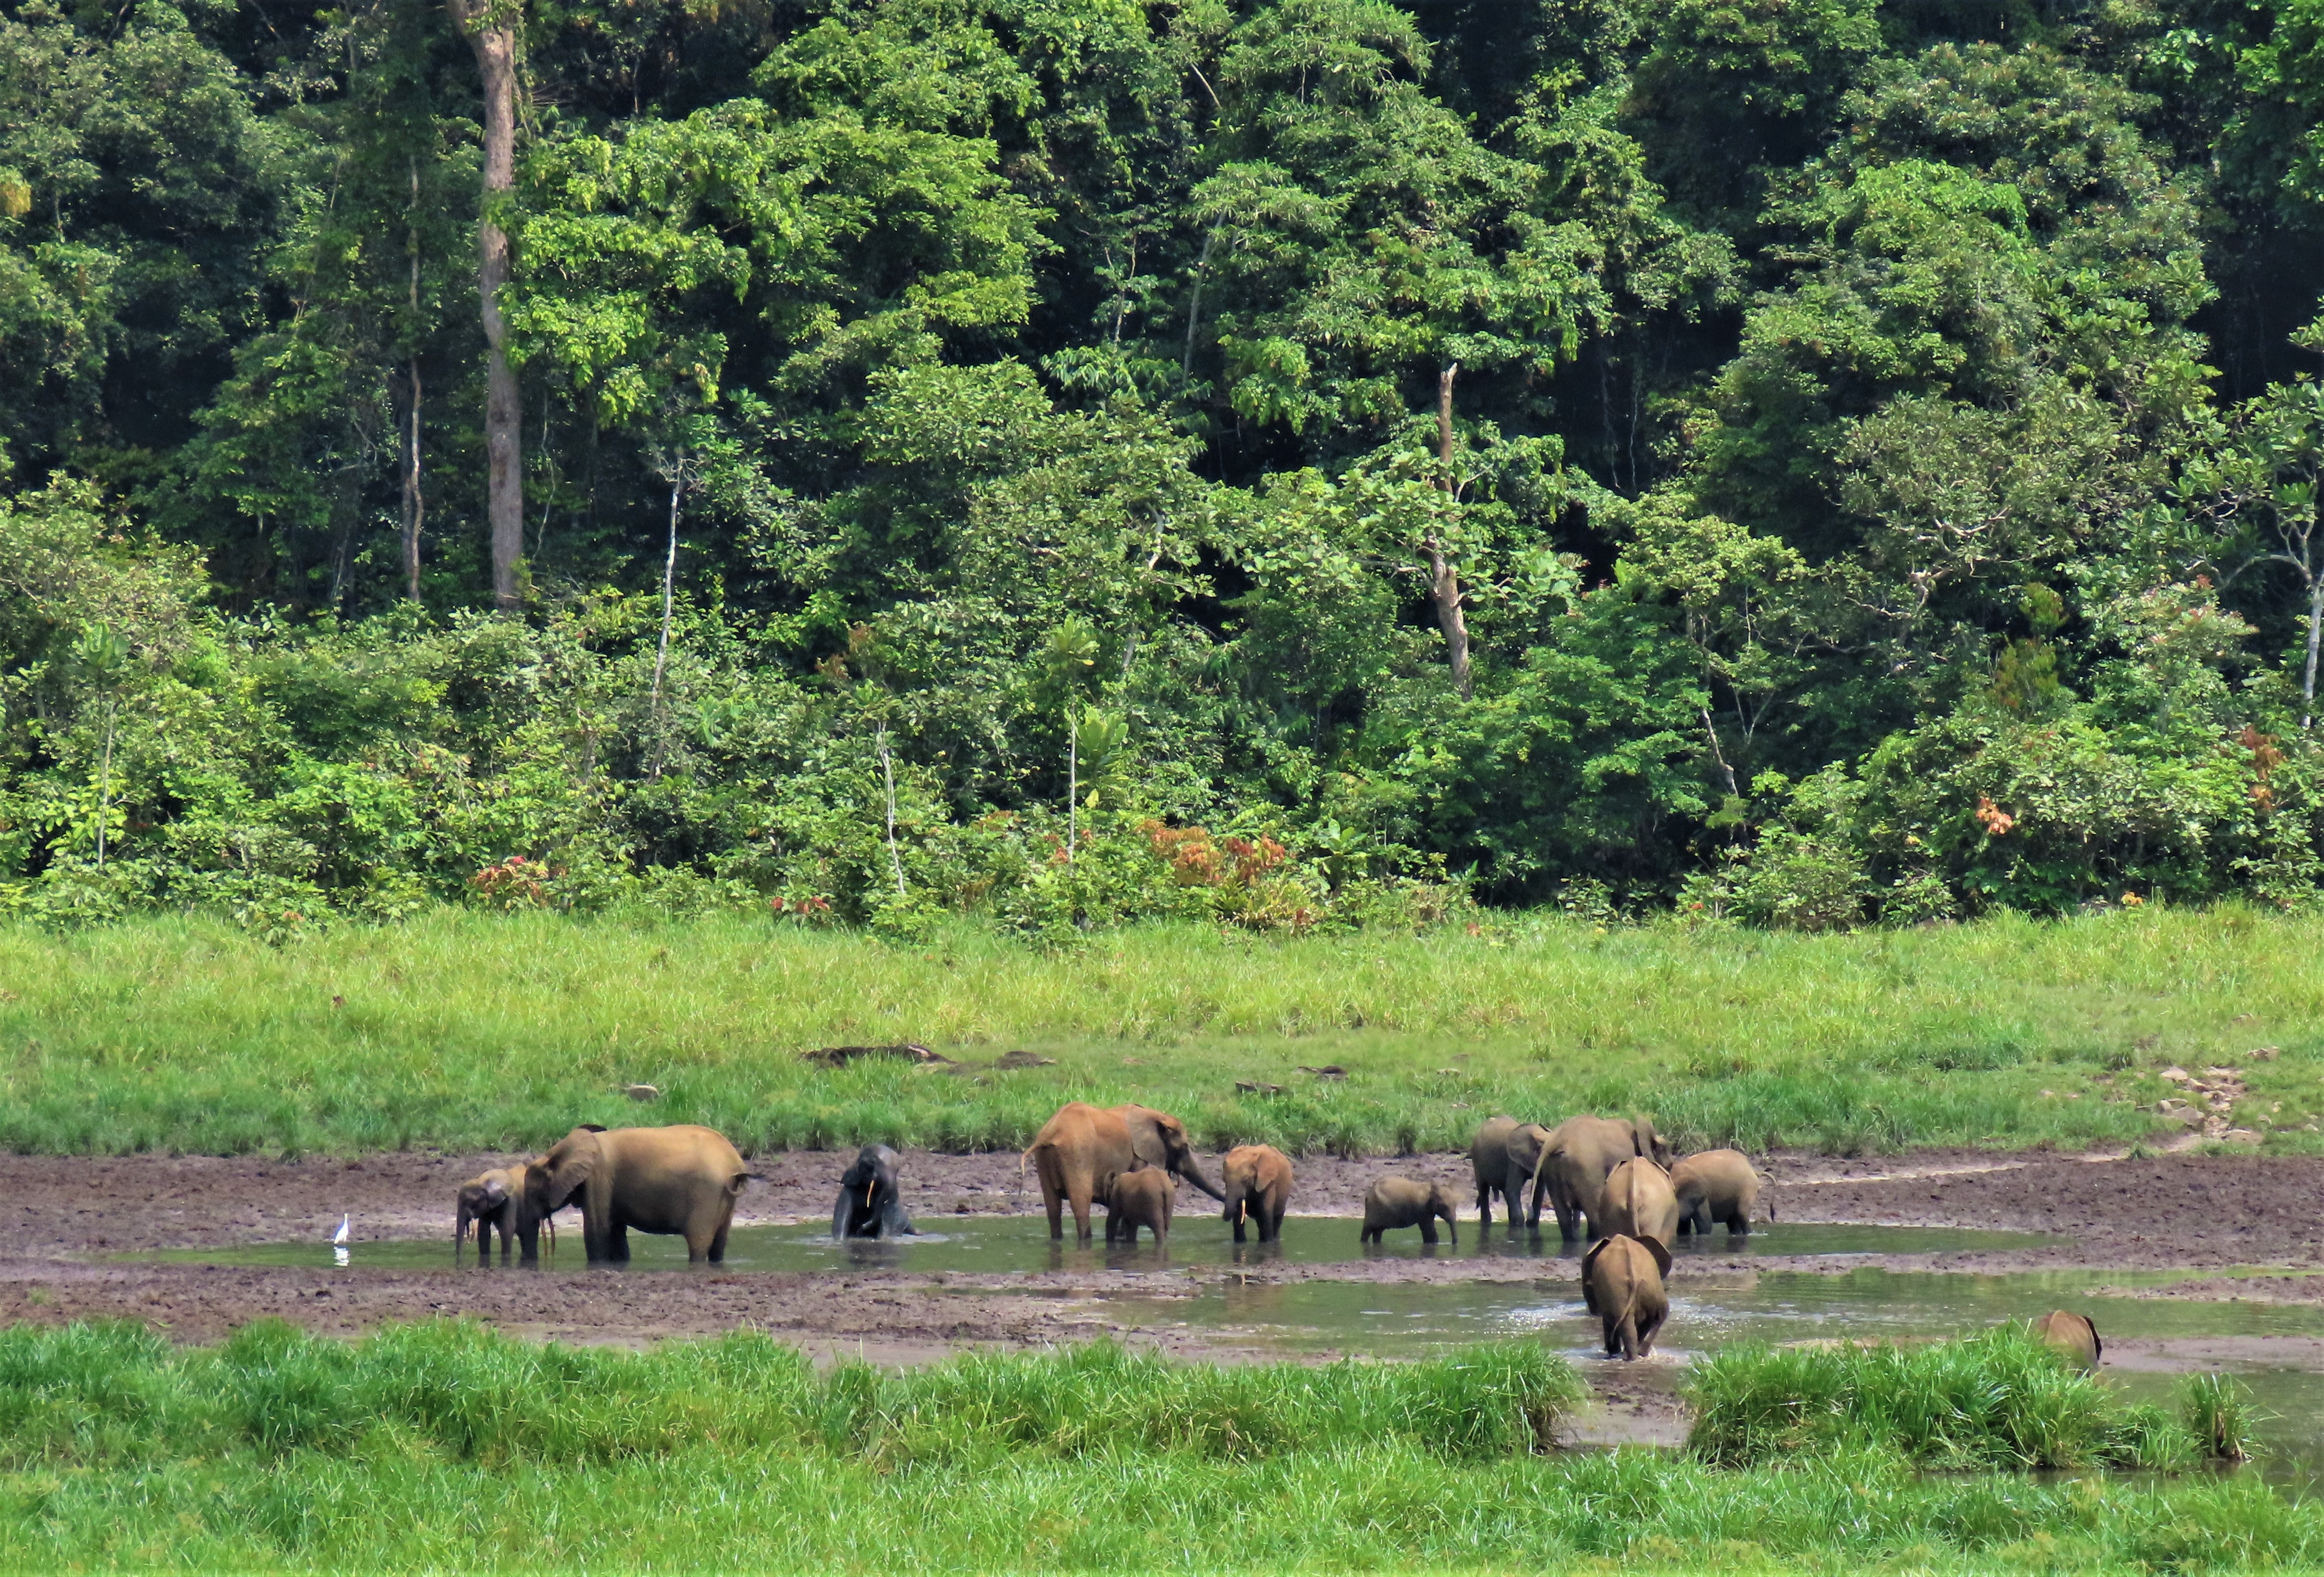 A herd of elephants drink from a river in Gabon